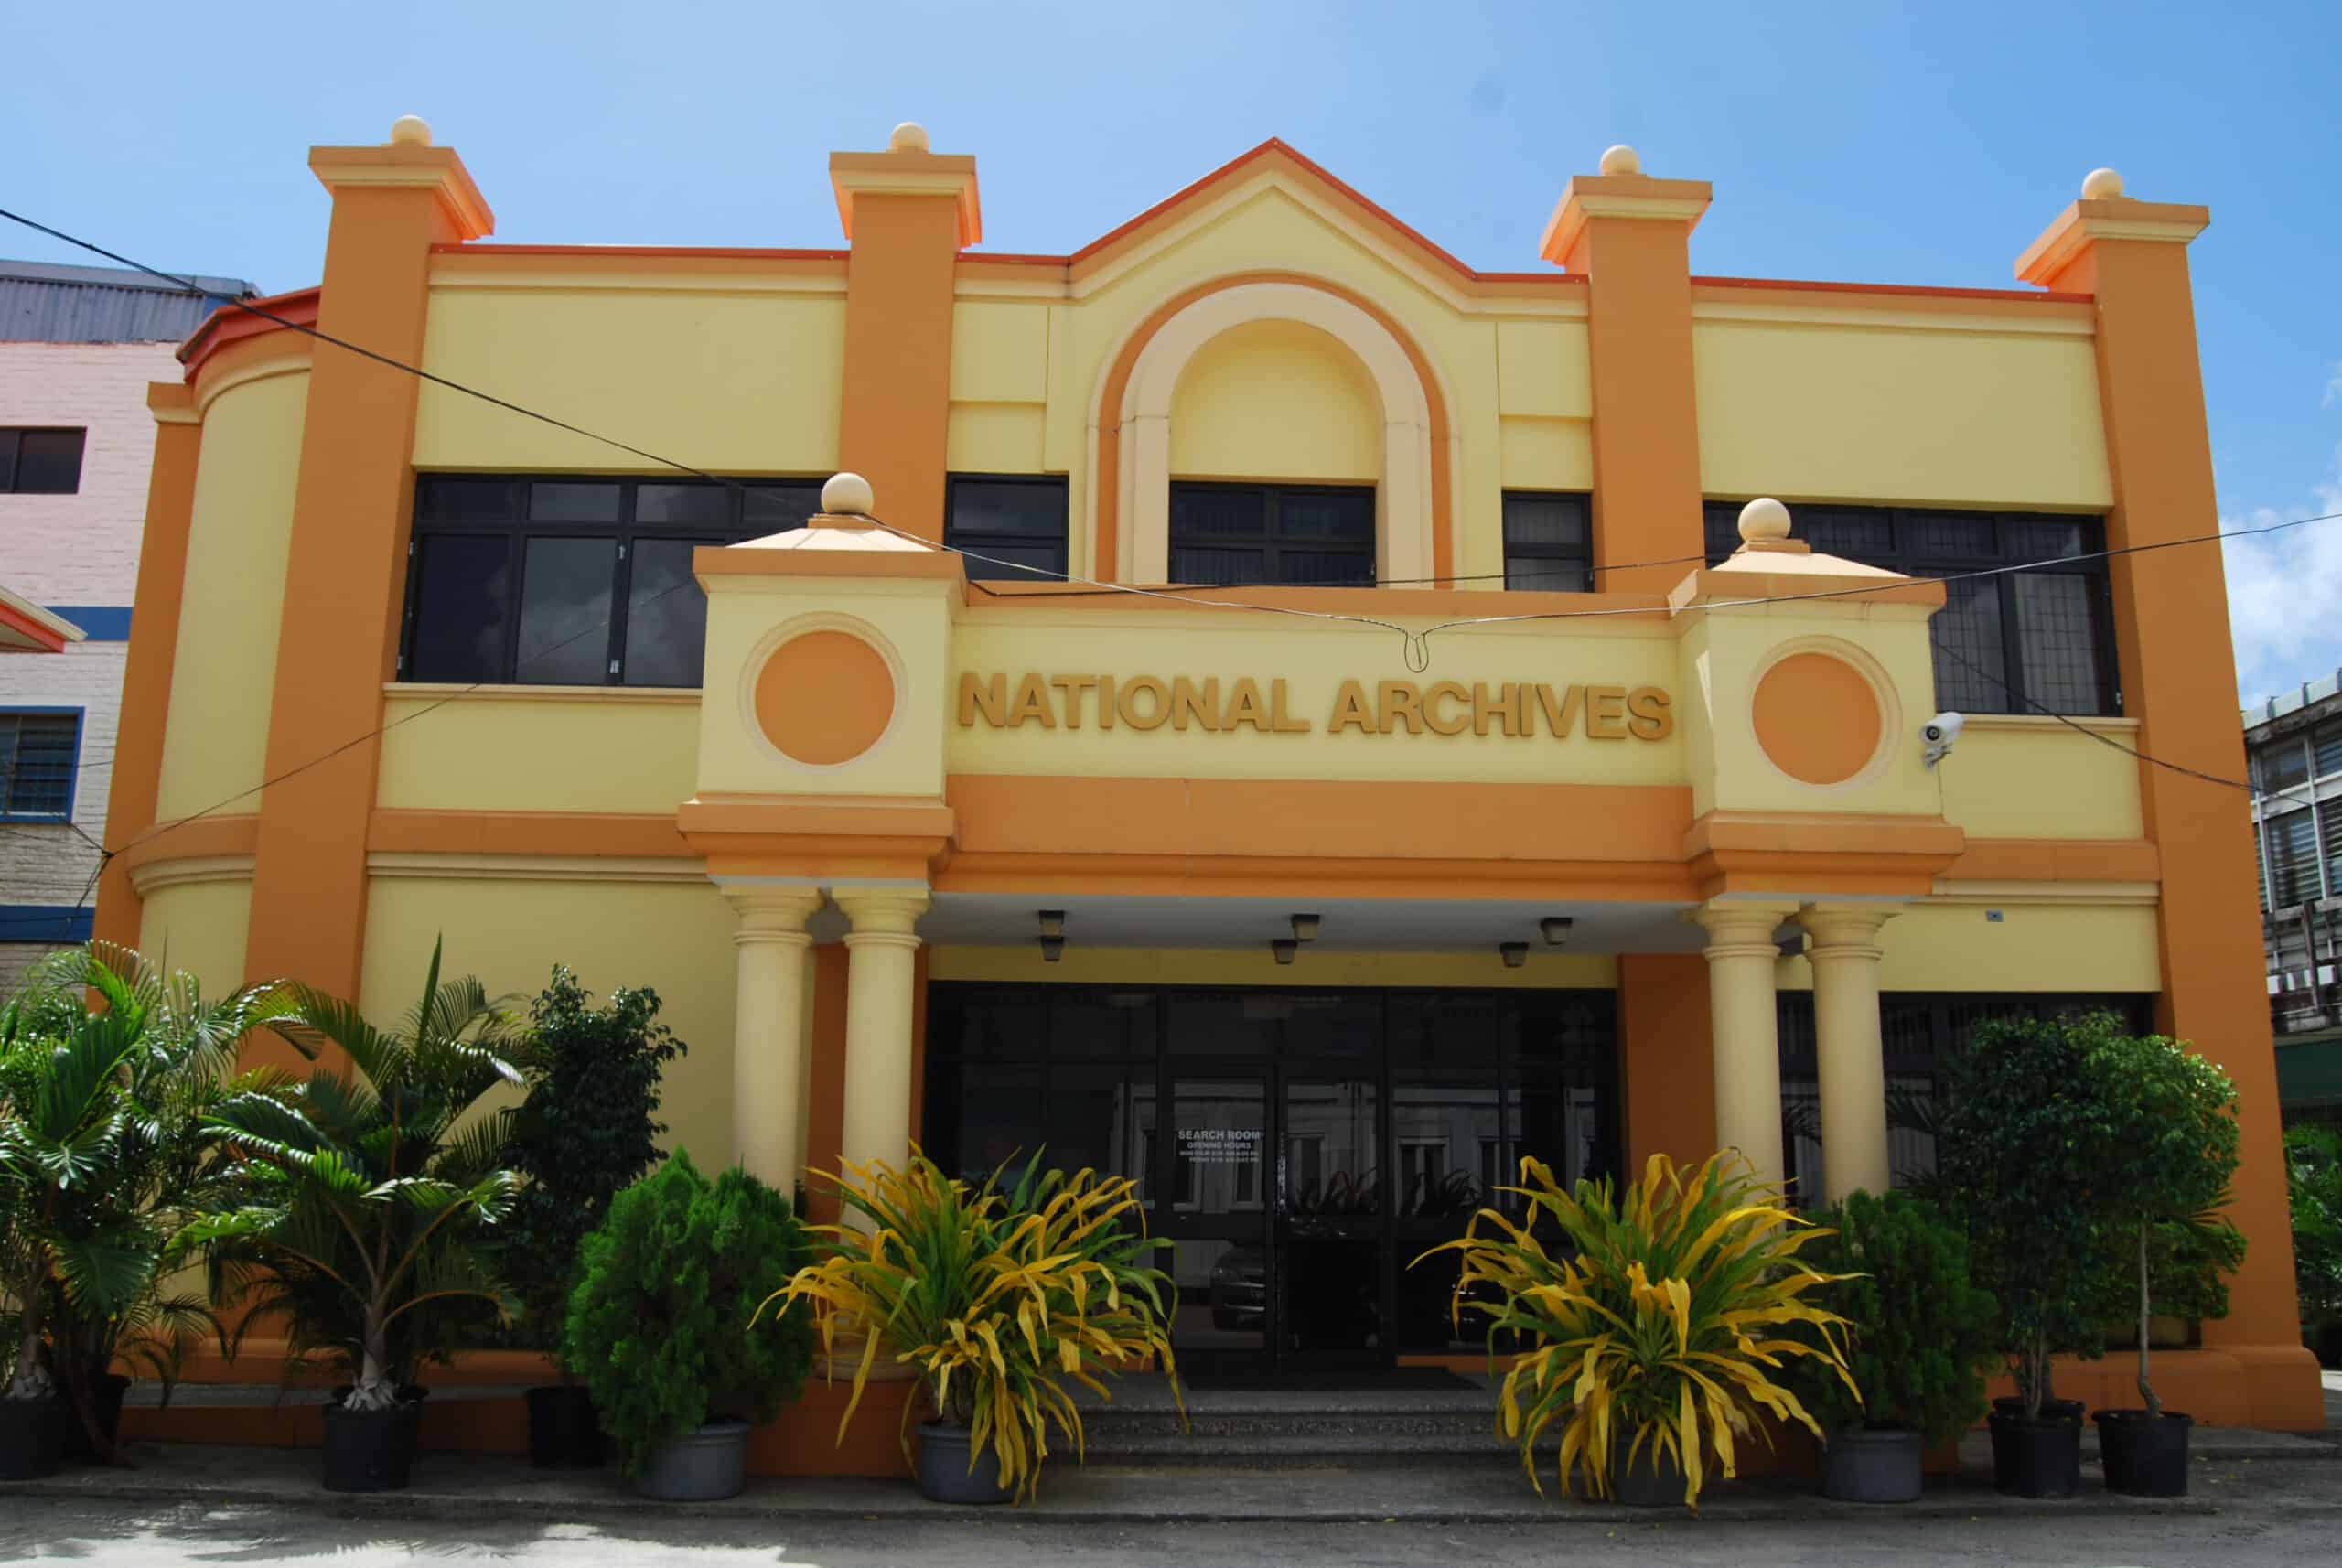 National archives of Trinidad and Tobago